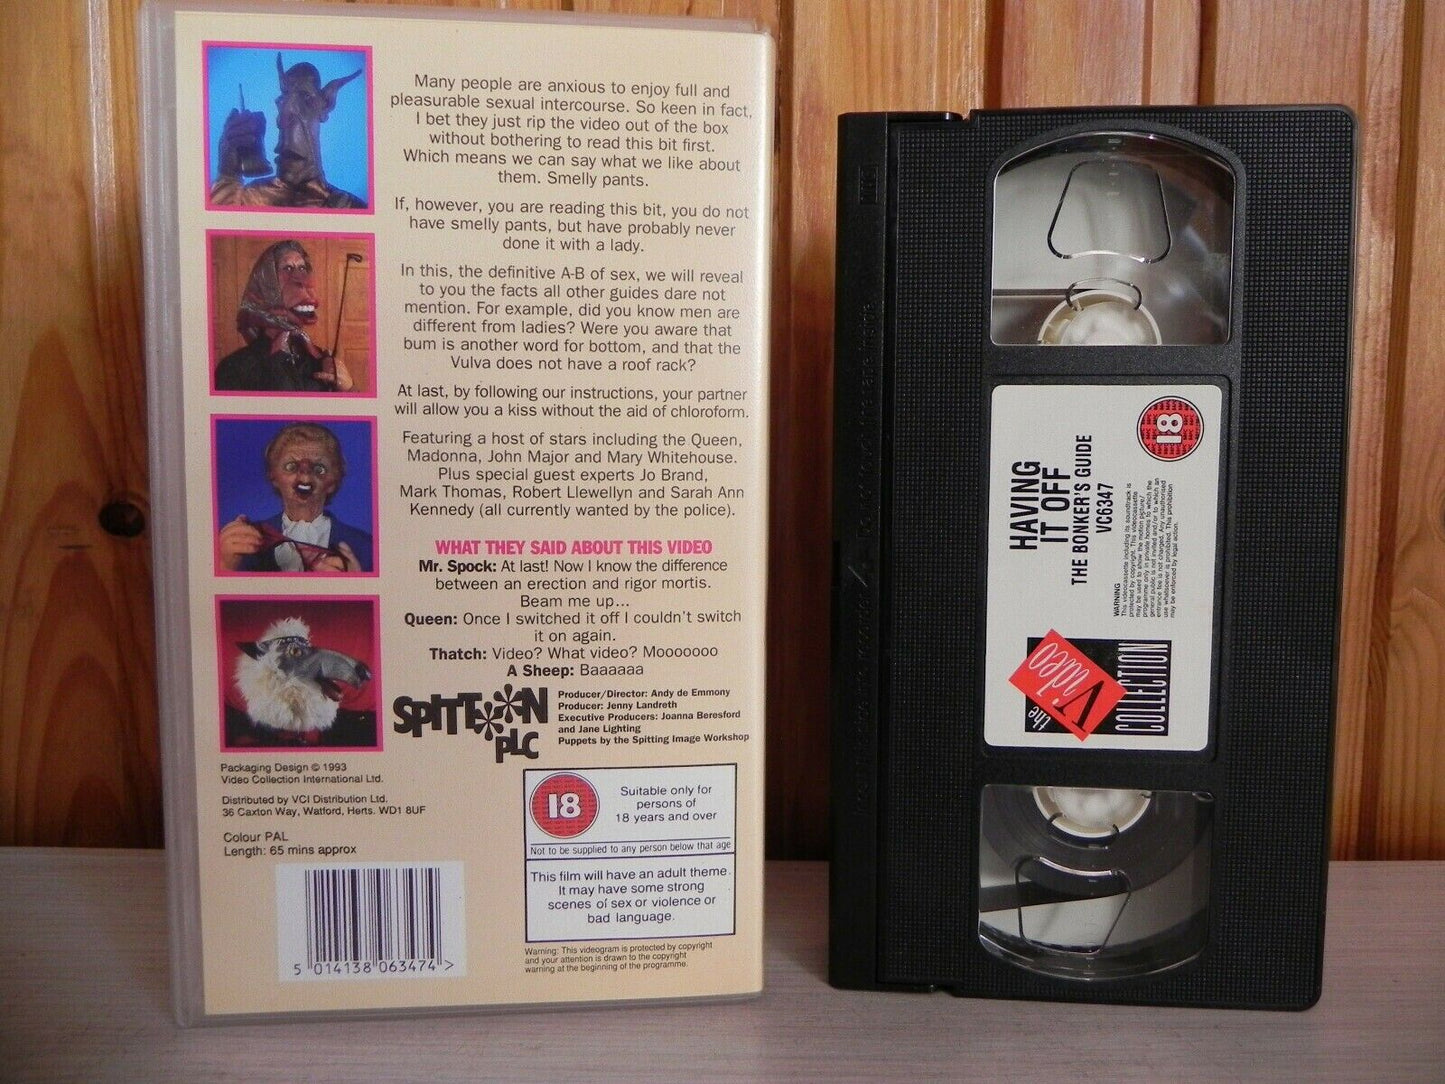 Having It Off - The Bonker's Guide - Only Persons Of 18 Years And Over - VHS-